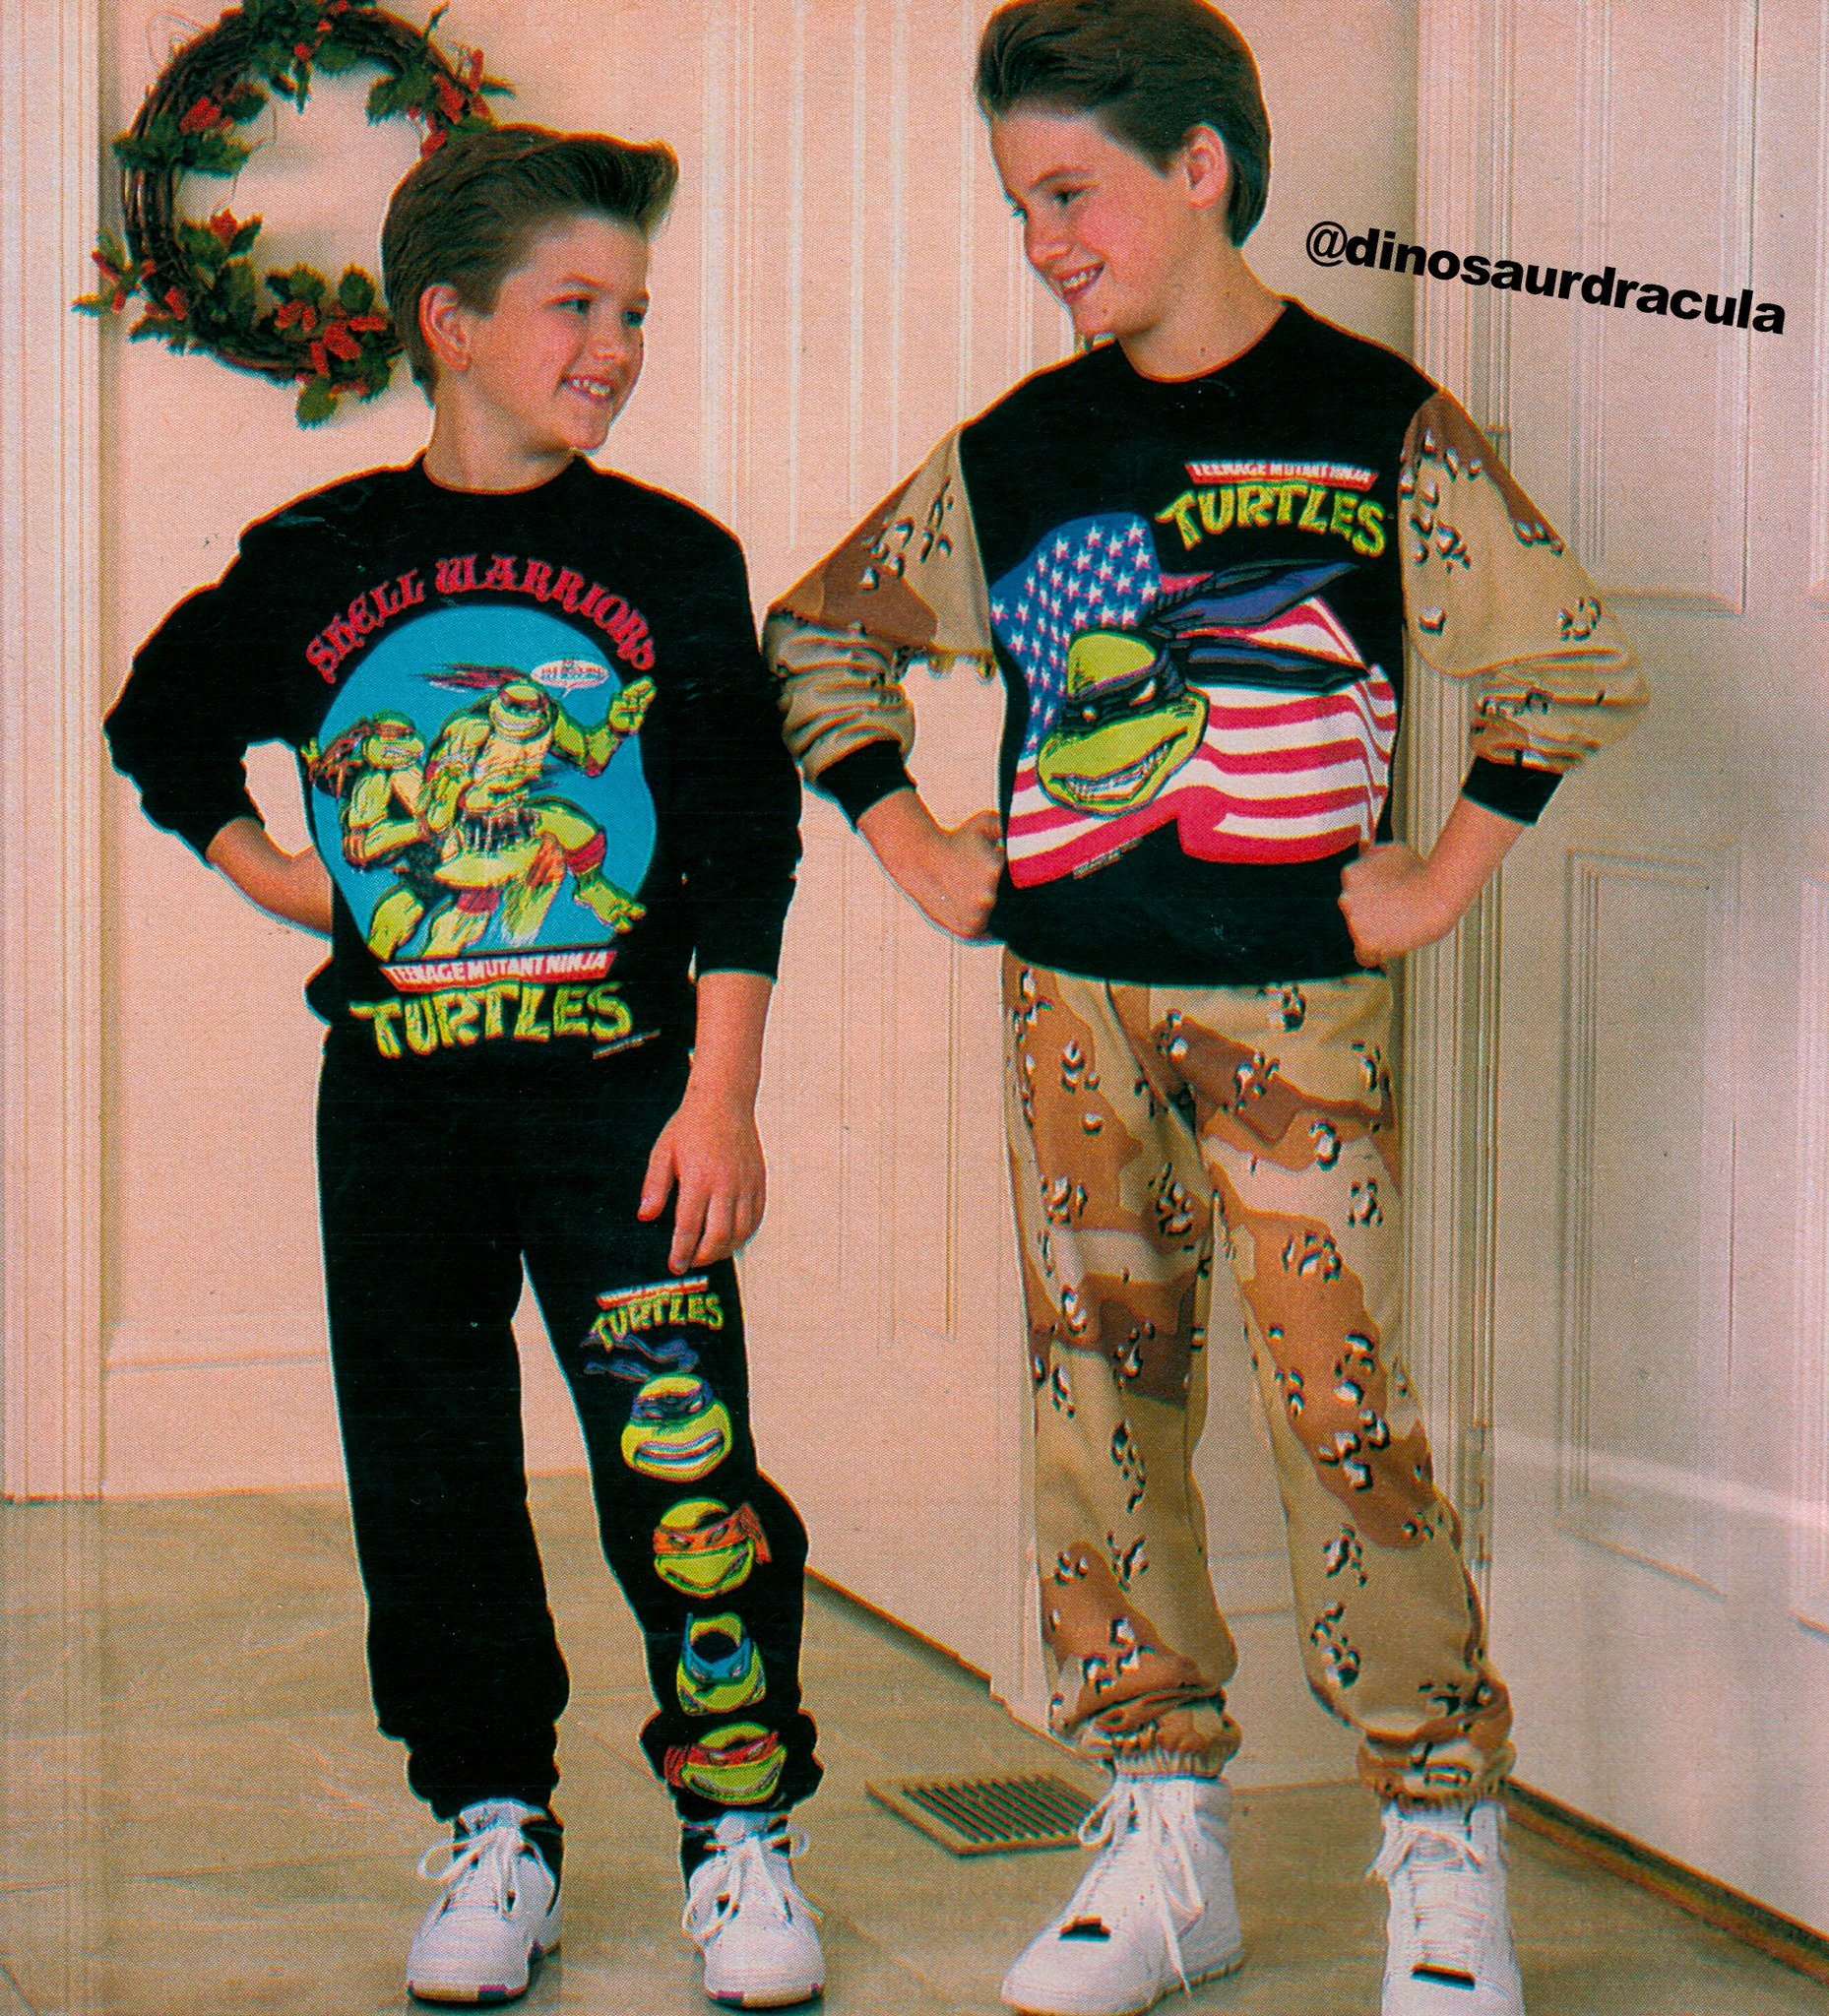 Dinosaur Dracula on X: Ninja Turtles fashion, from 1991. (You can tell it  was 1991 from the haircuts, but also because of the outfit on the right.  The Gulf War bled patriotic